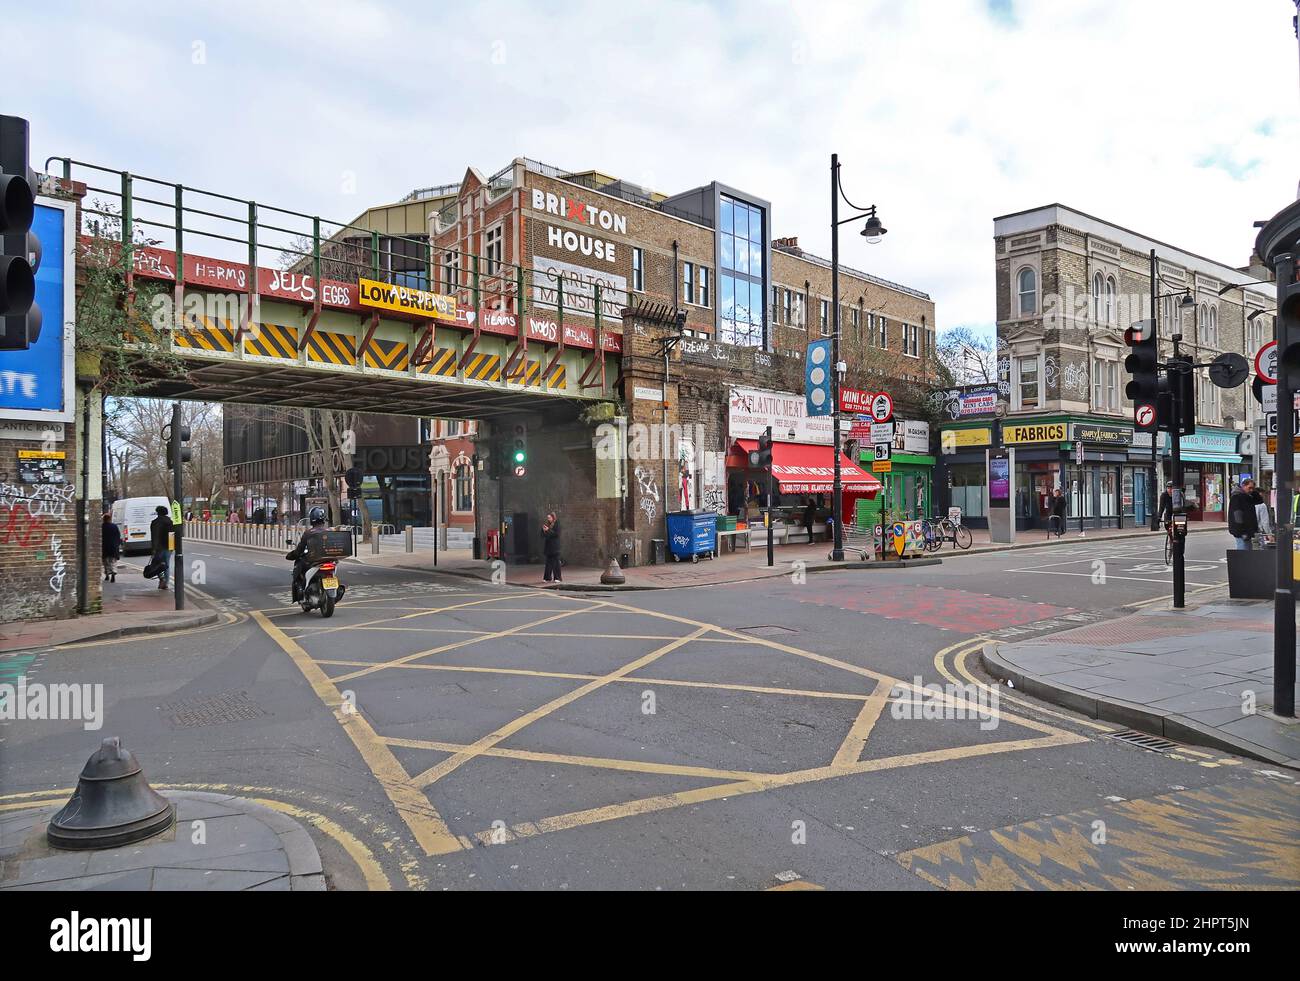 Brixton, London, UK. The busy junction of Coldharbour Lane and Atlantic Road showing the railway bridge, shops and the new Brixton House development. Stock Photo